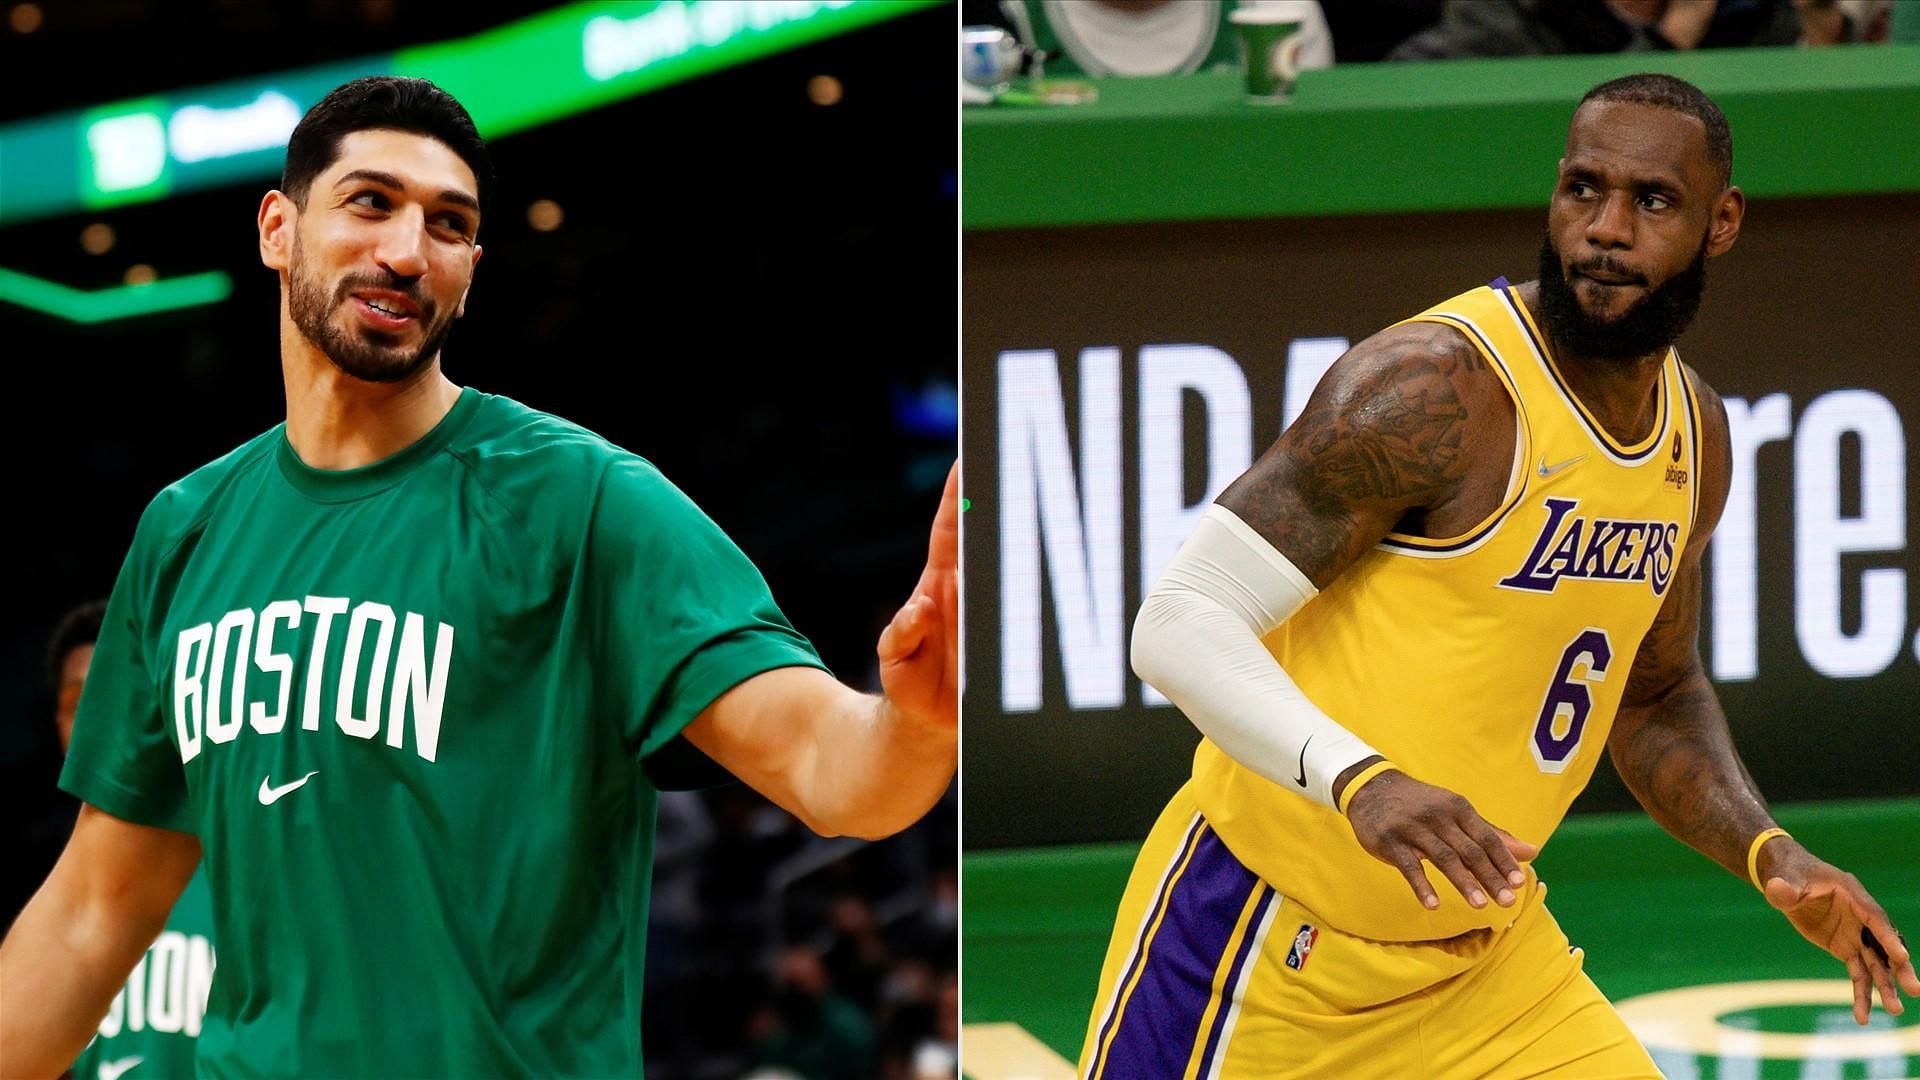 Enes Kanter Freedom claims LeBron's teammate told him to continue  criticizing The King - Basketball Network - Your daily dose of basketball